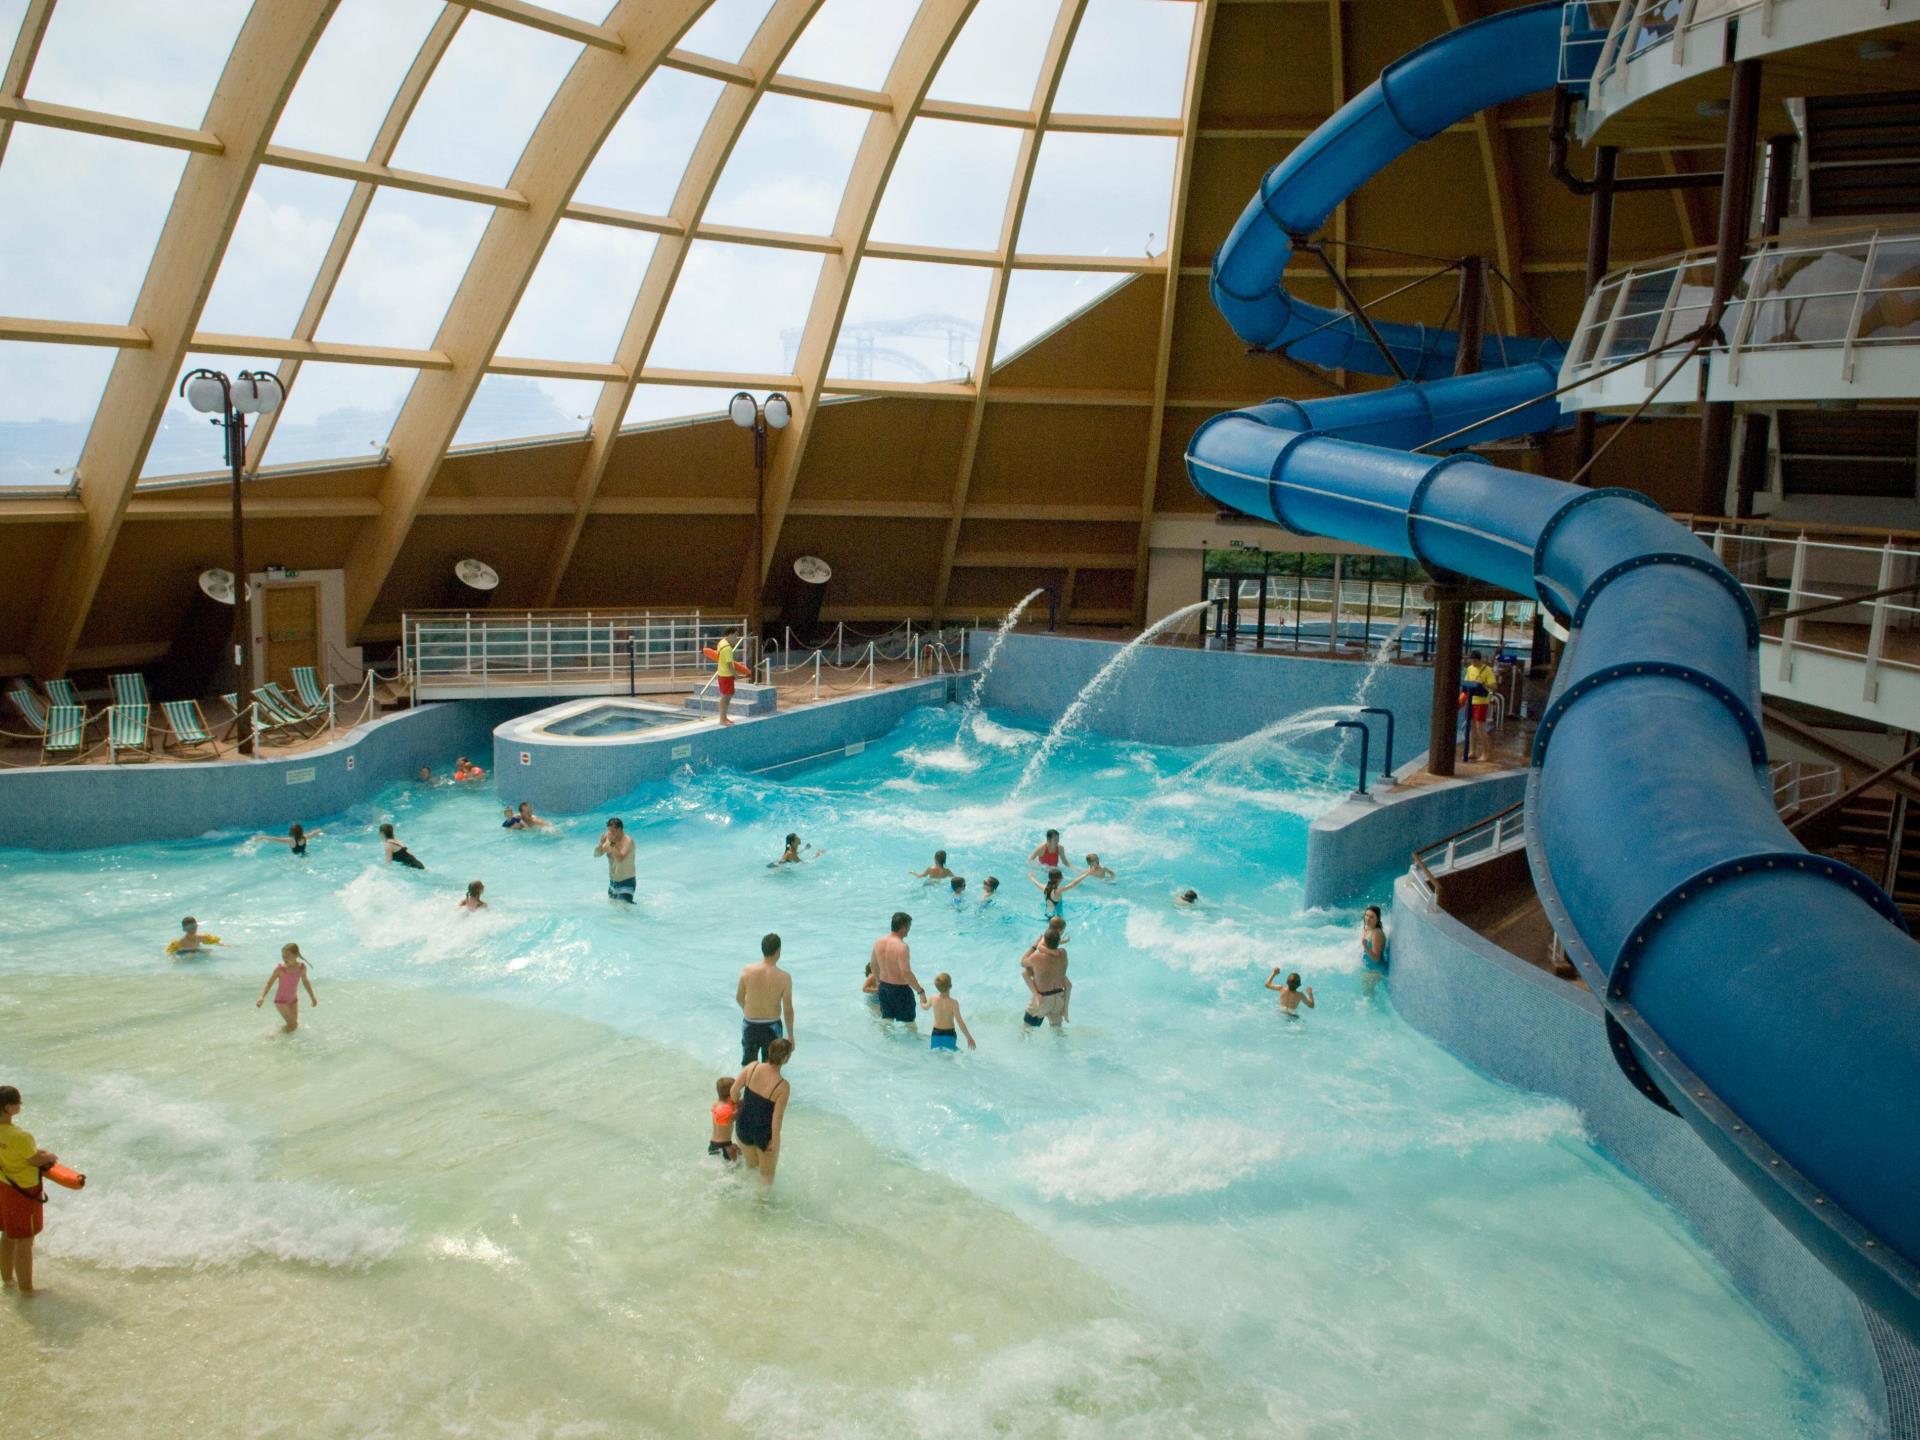 The Blue Lagoon Water Park